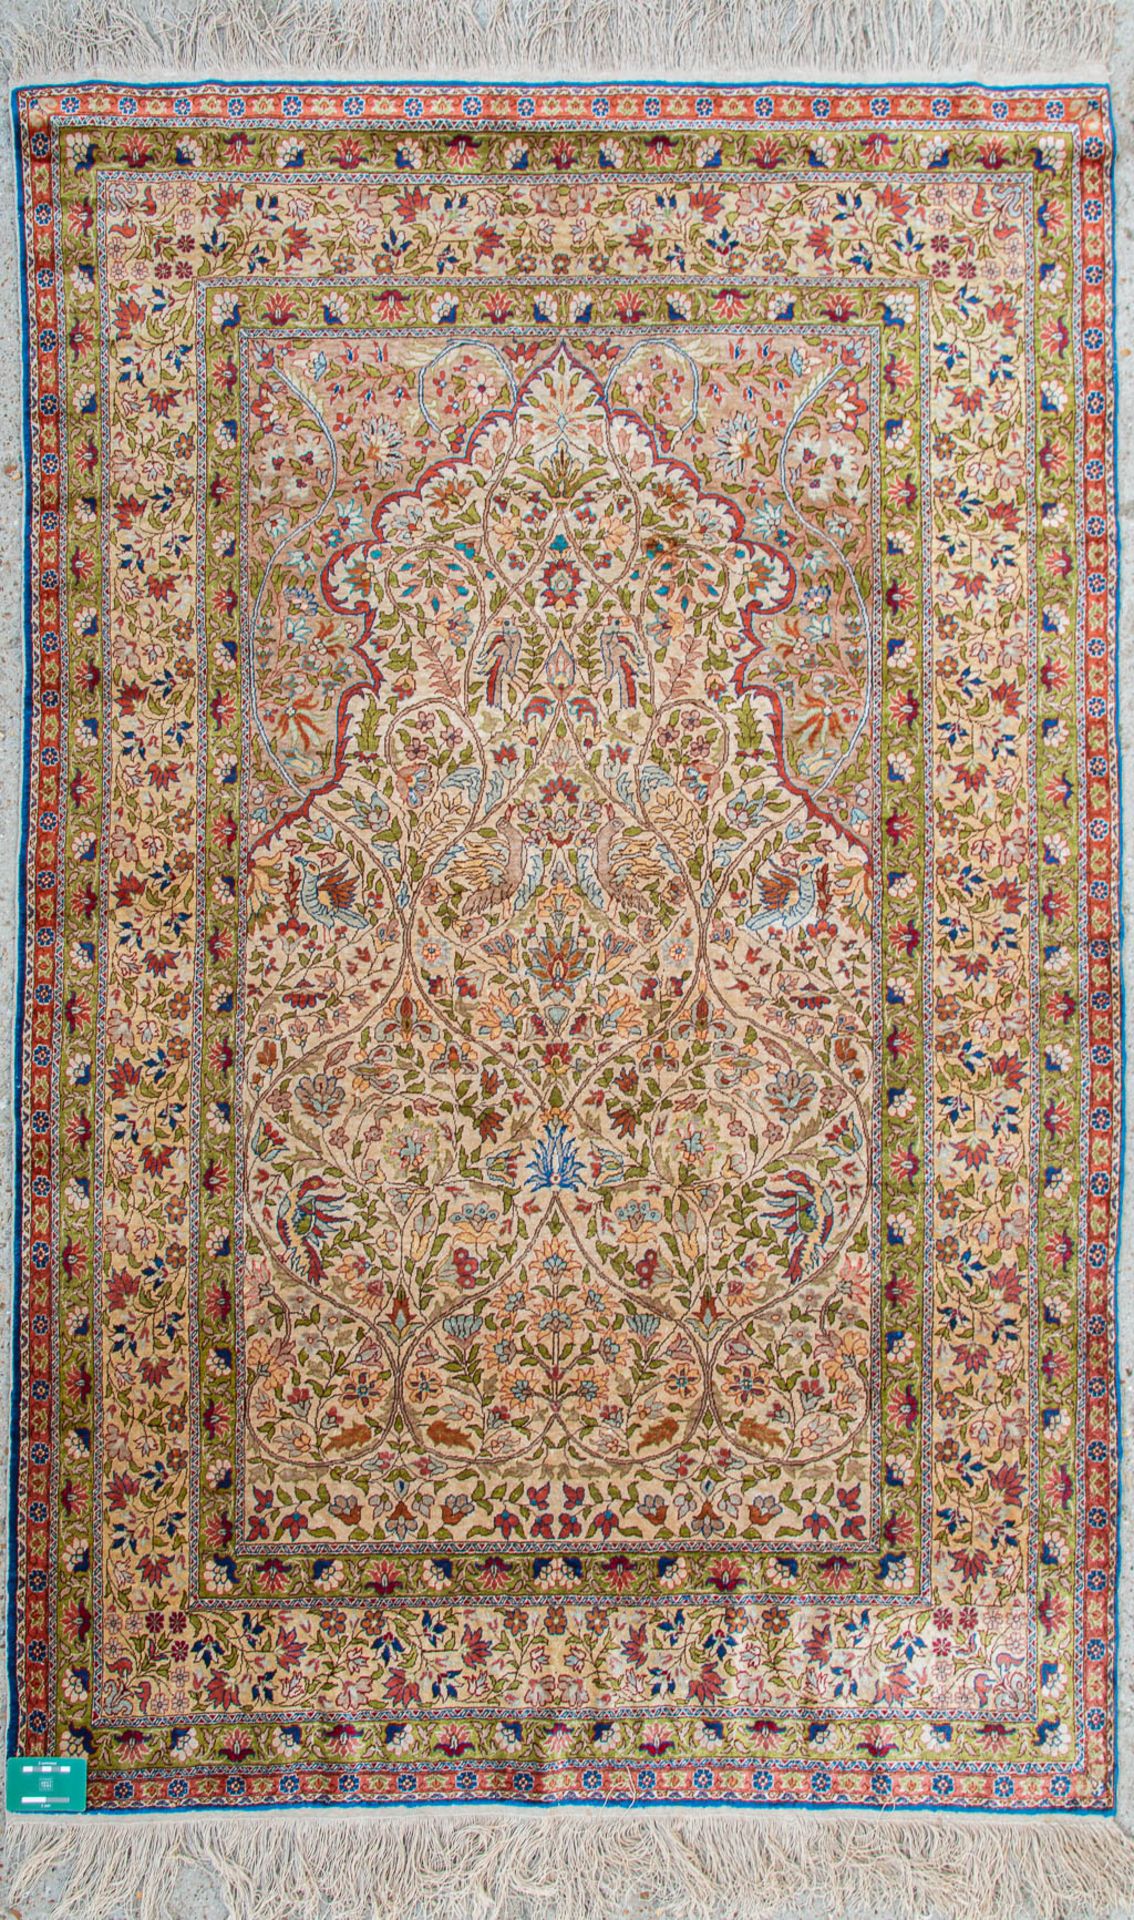 An Oriental hand-made carpet made of silk and marked Hereke (191 x 120) (120 x 190 cm) - Image 7 of 7